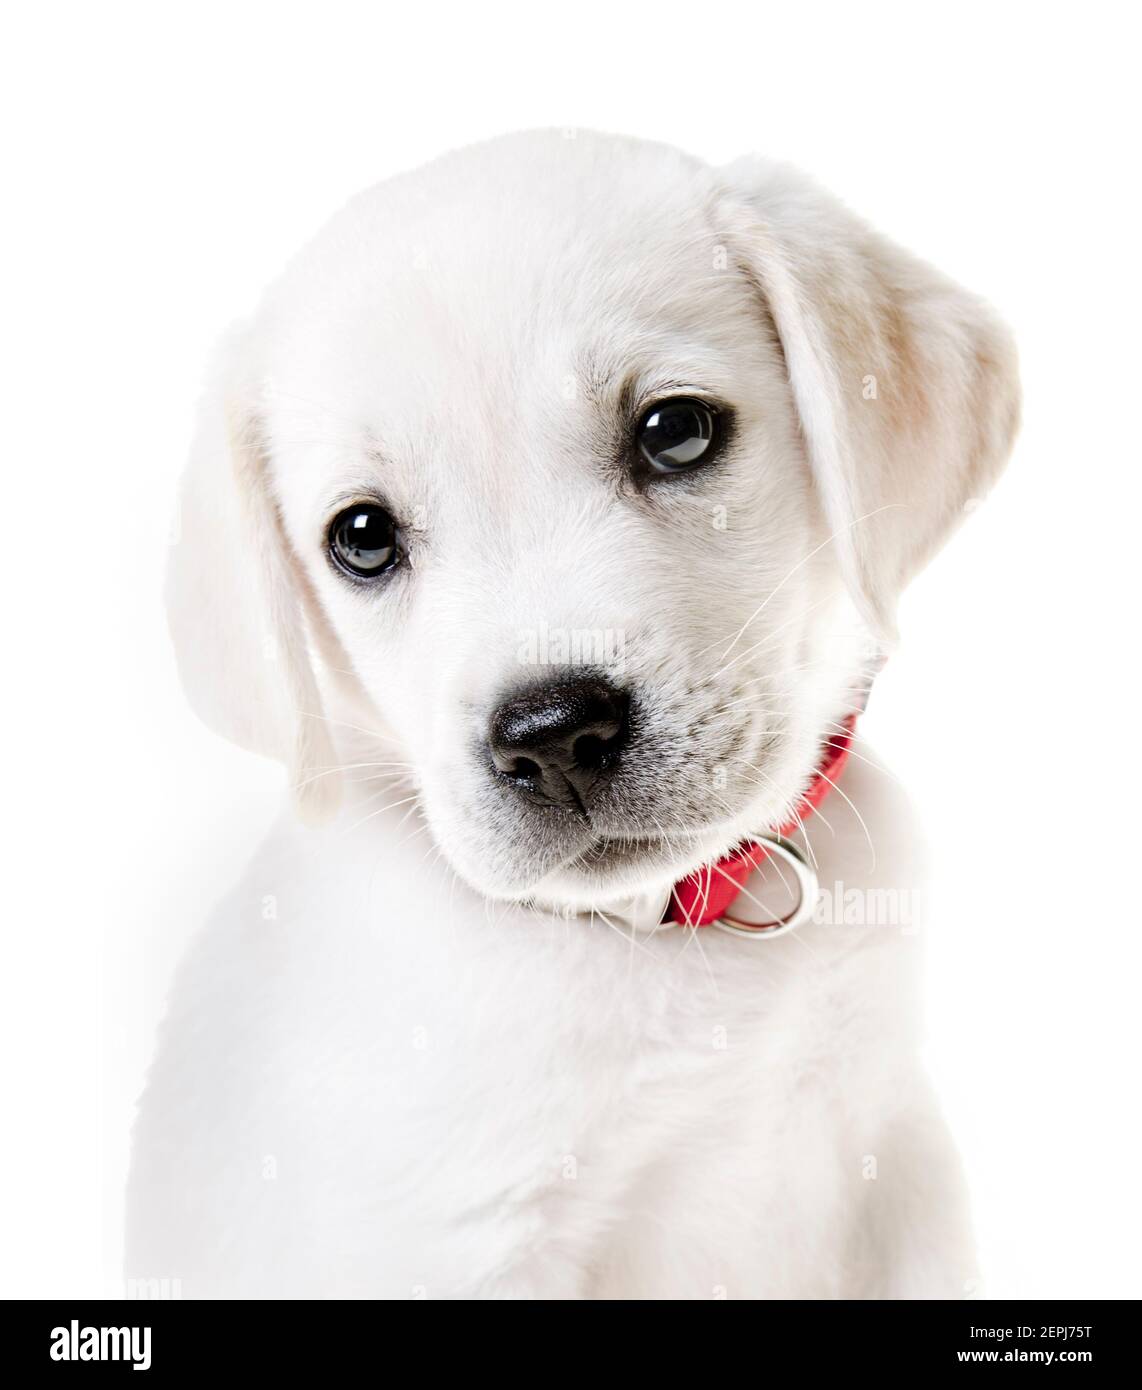 An adorable yellow lab puppy isolated on white Stock Photo